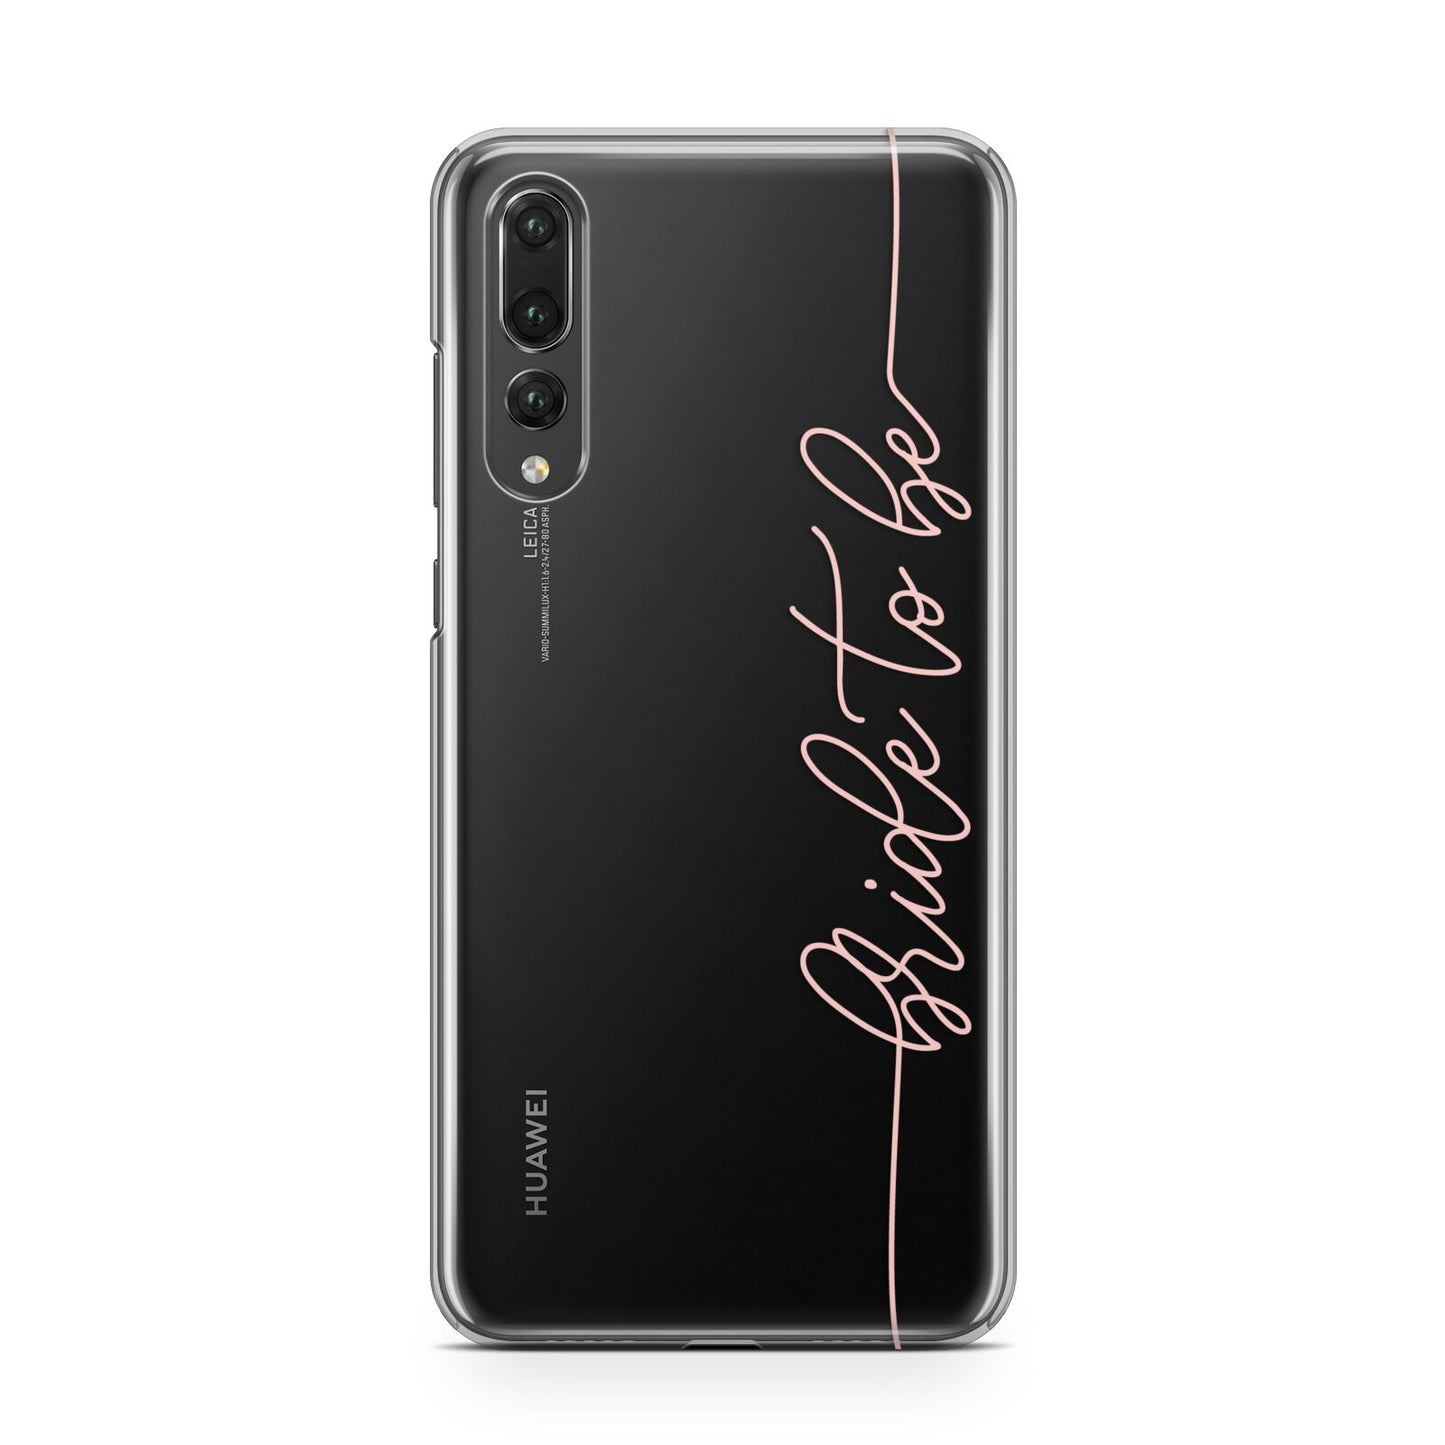 Bride To Be Huawei P20 Pro Phone Case